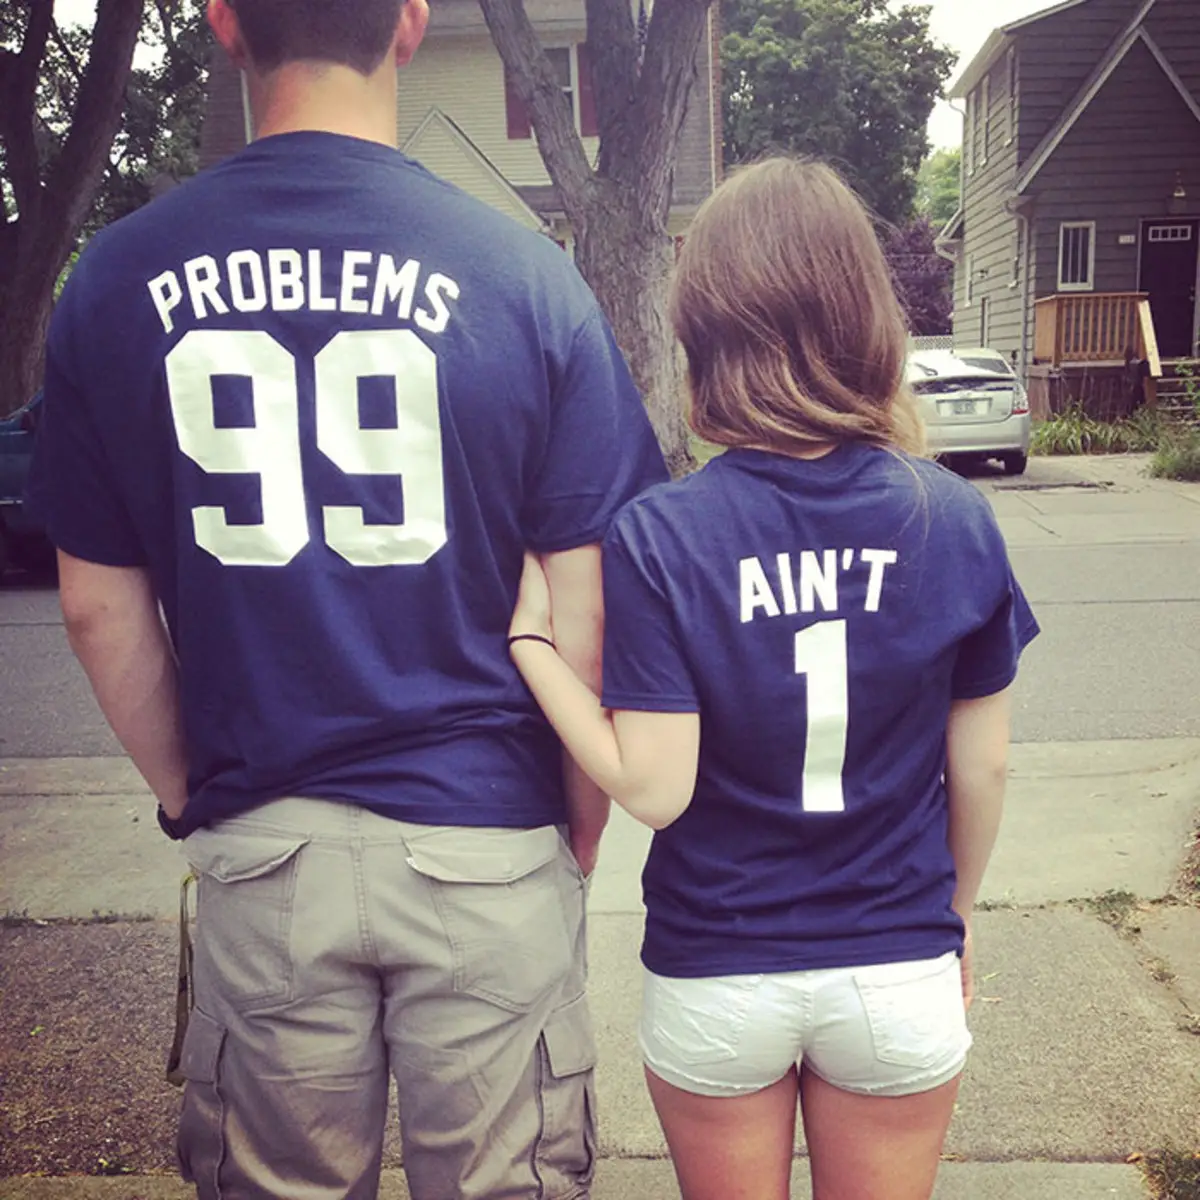 funny matching t shirts 12 - 15 Of The Best Matching T-Shirt Ideas Ever